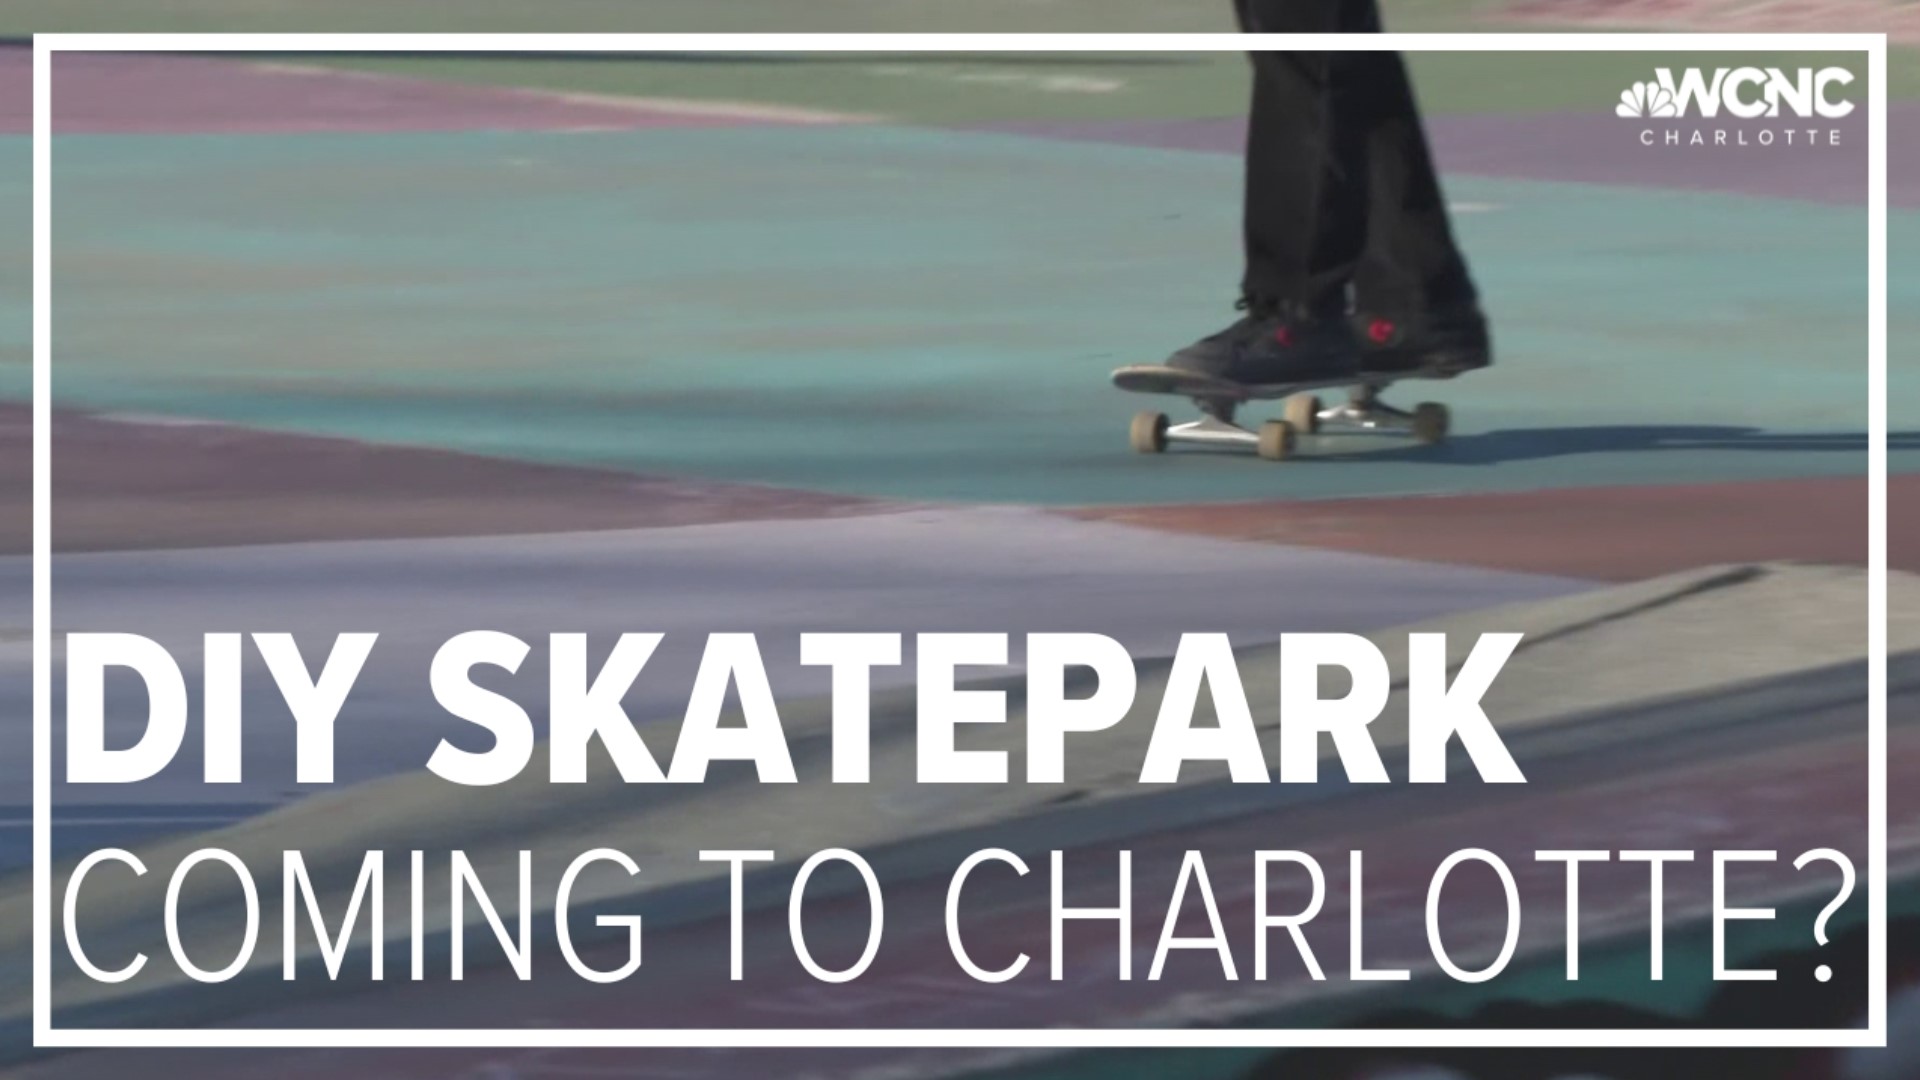 The skatepark, which was located at the old Eastland Mall on Central Avenue for years, could now be rebuilt just minutes away at Kilborne Park.